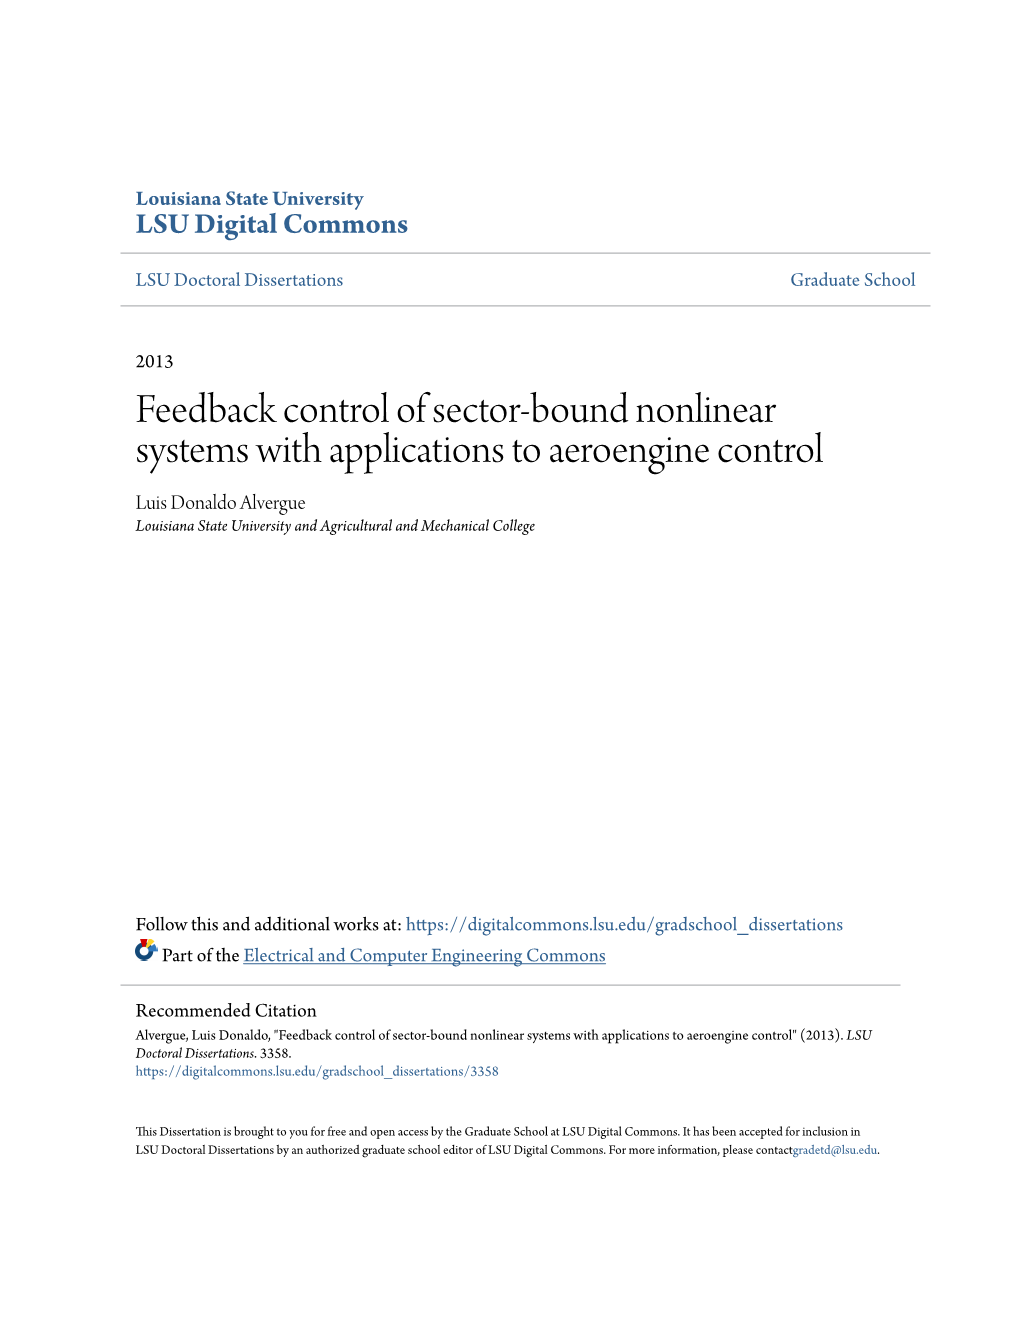 Feedback Control of Sector-Bound Nonlinear Systems with Applications